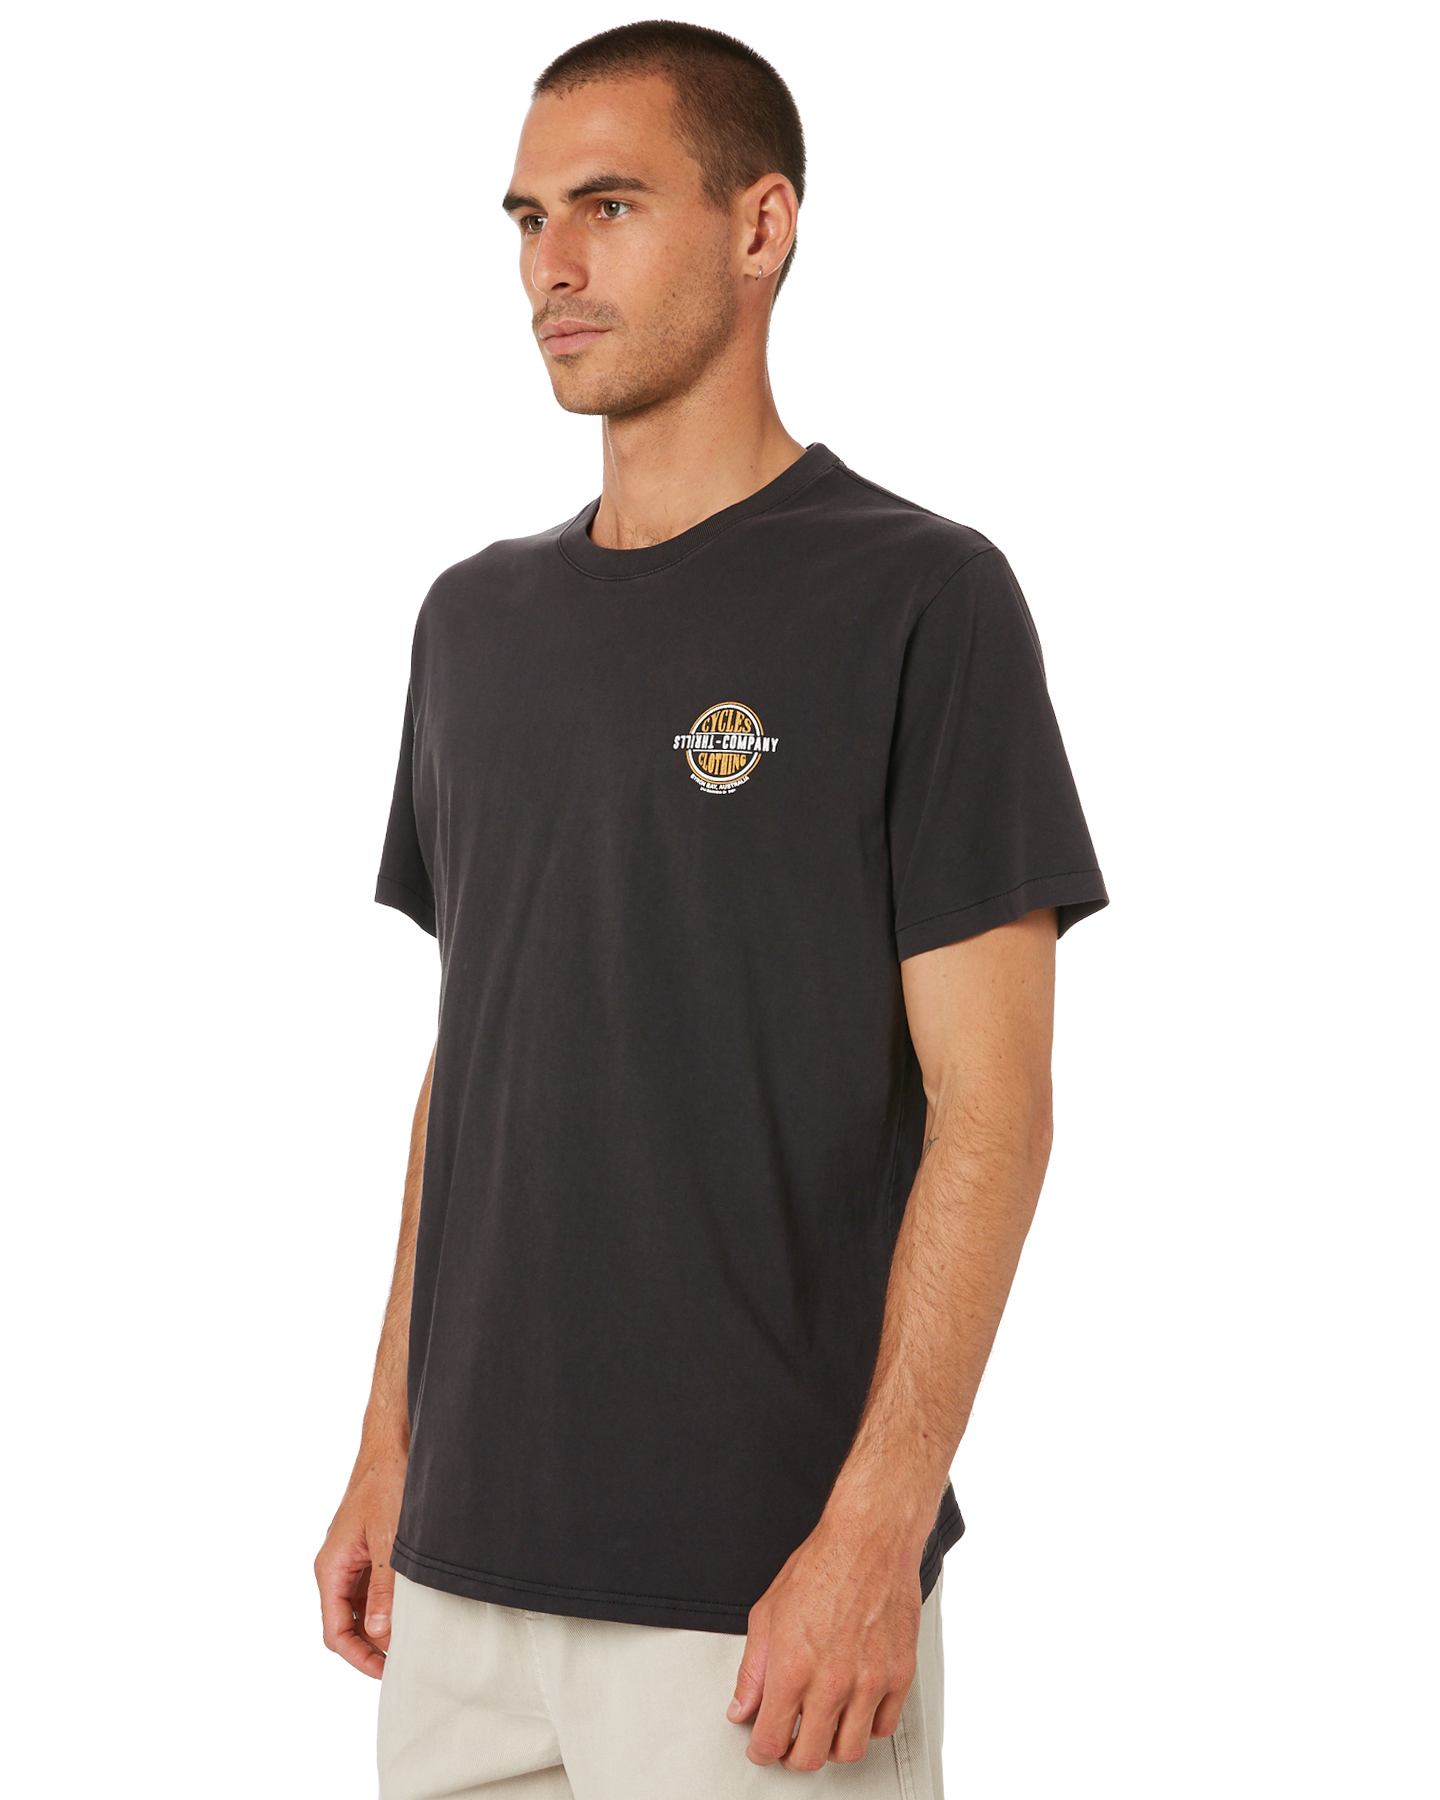 Thrills Cycles & Clothing Mens Tee - Vintage Black | SurfStitch